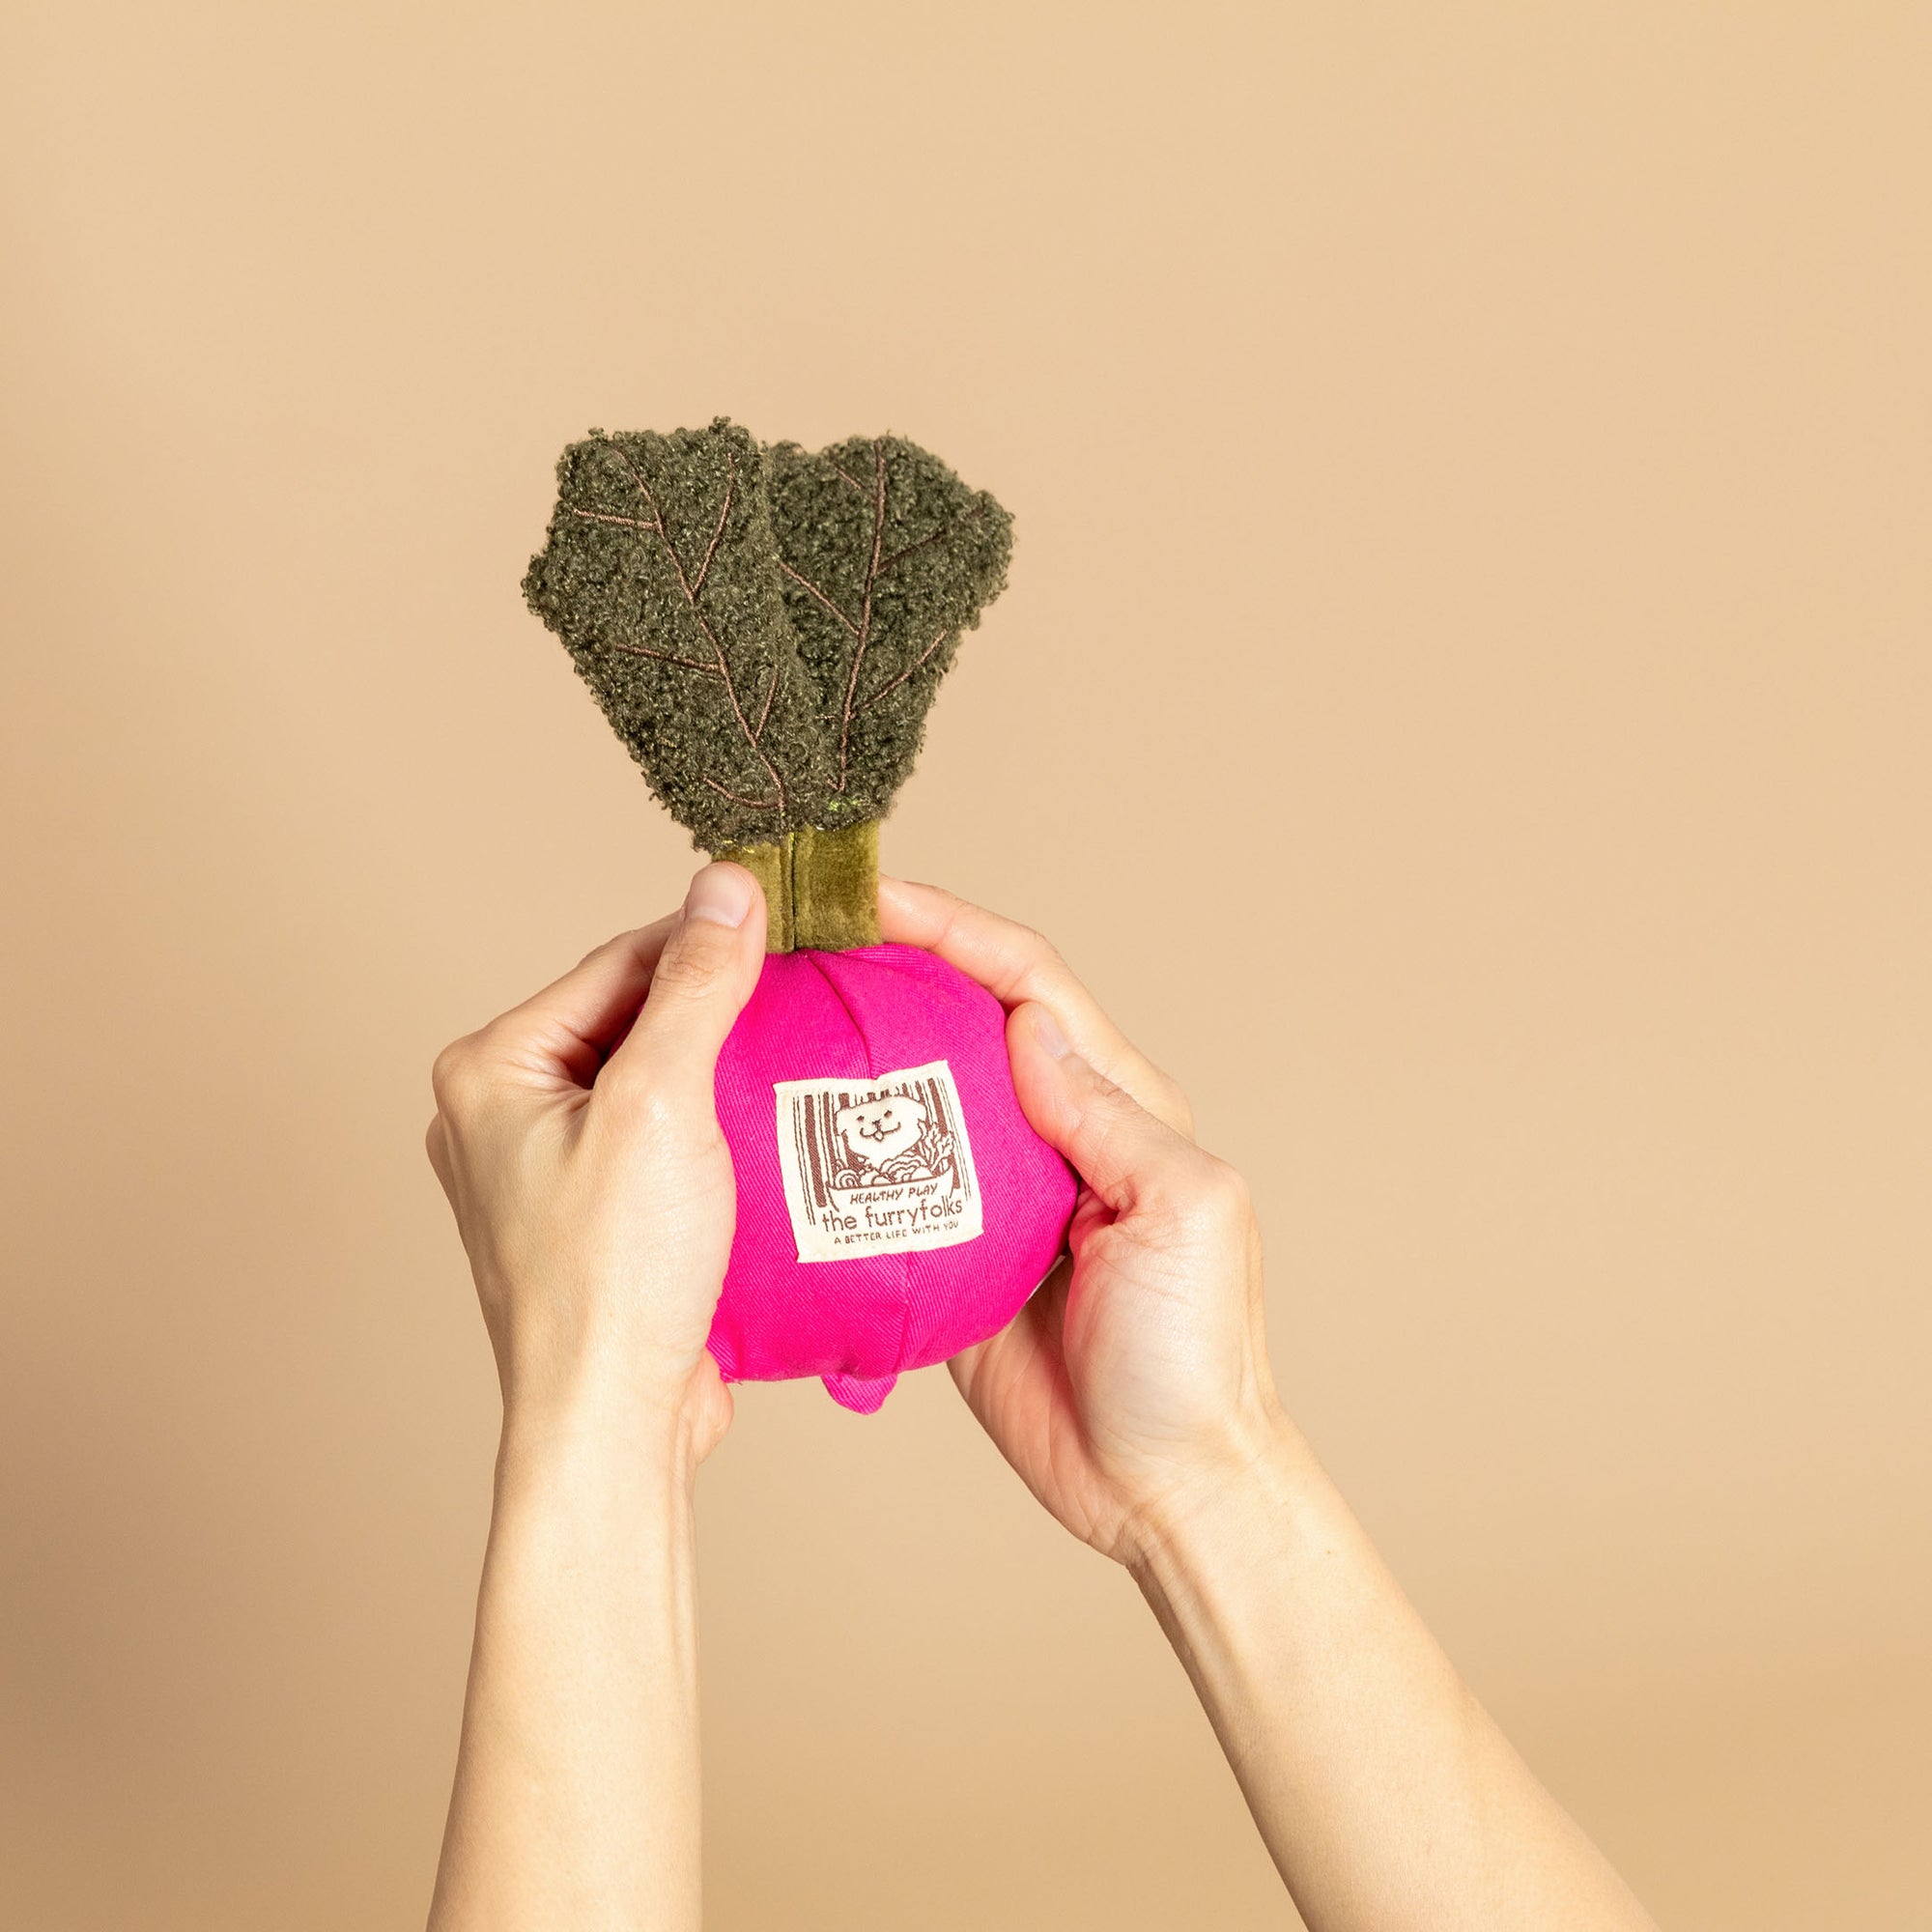 The image features two hands holding up a plush pink radish-shaped toy with a textured green top resembling leaves. The toy includes a label with "the furryfolks" branding, indicating it is part of a line of pet products. The beige background complements the toy's bright color, making it stand out as an attractive and playful item for dogs. The toy's design suggests it is intended for pets to enjoy both visually and tactilely, likely for activities like fetch or scent work.